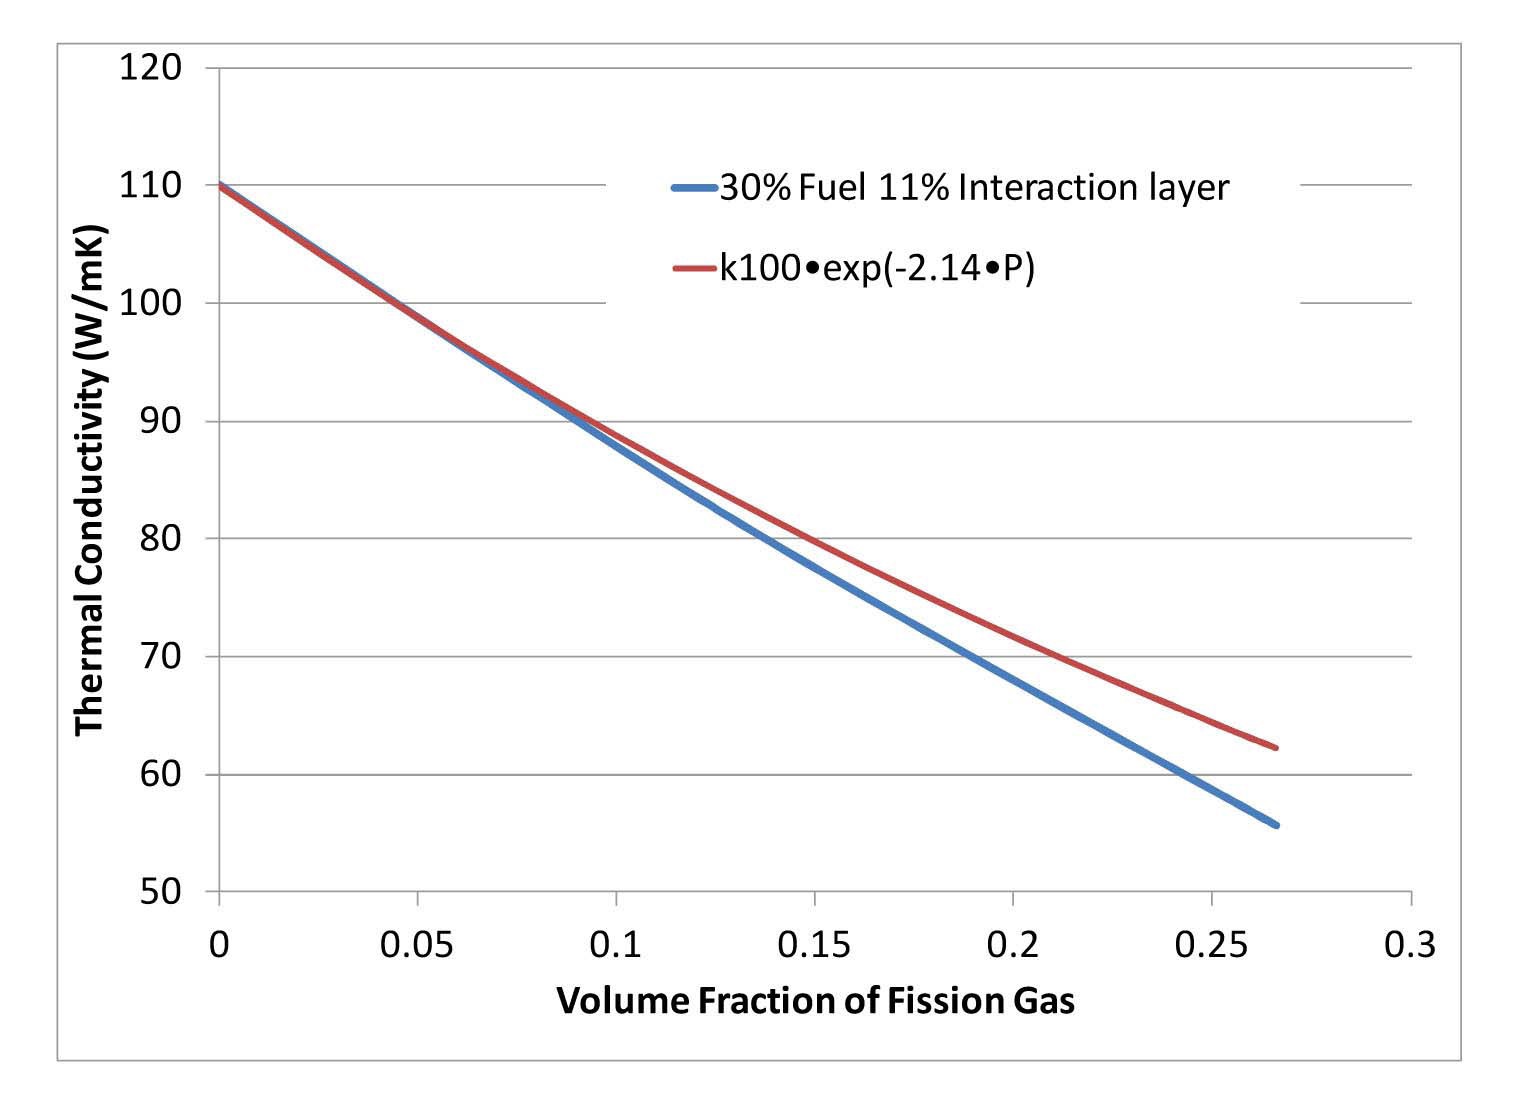 Effective Thermal Conductivity as a Function of
Fission gas Volume Fraction